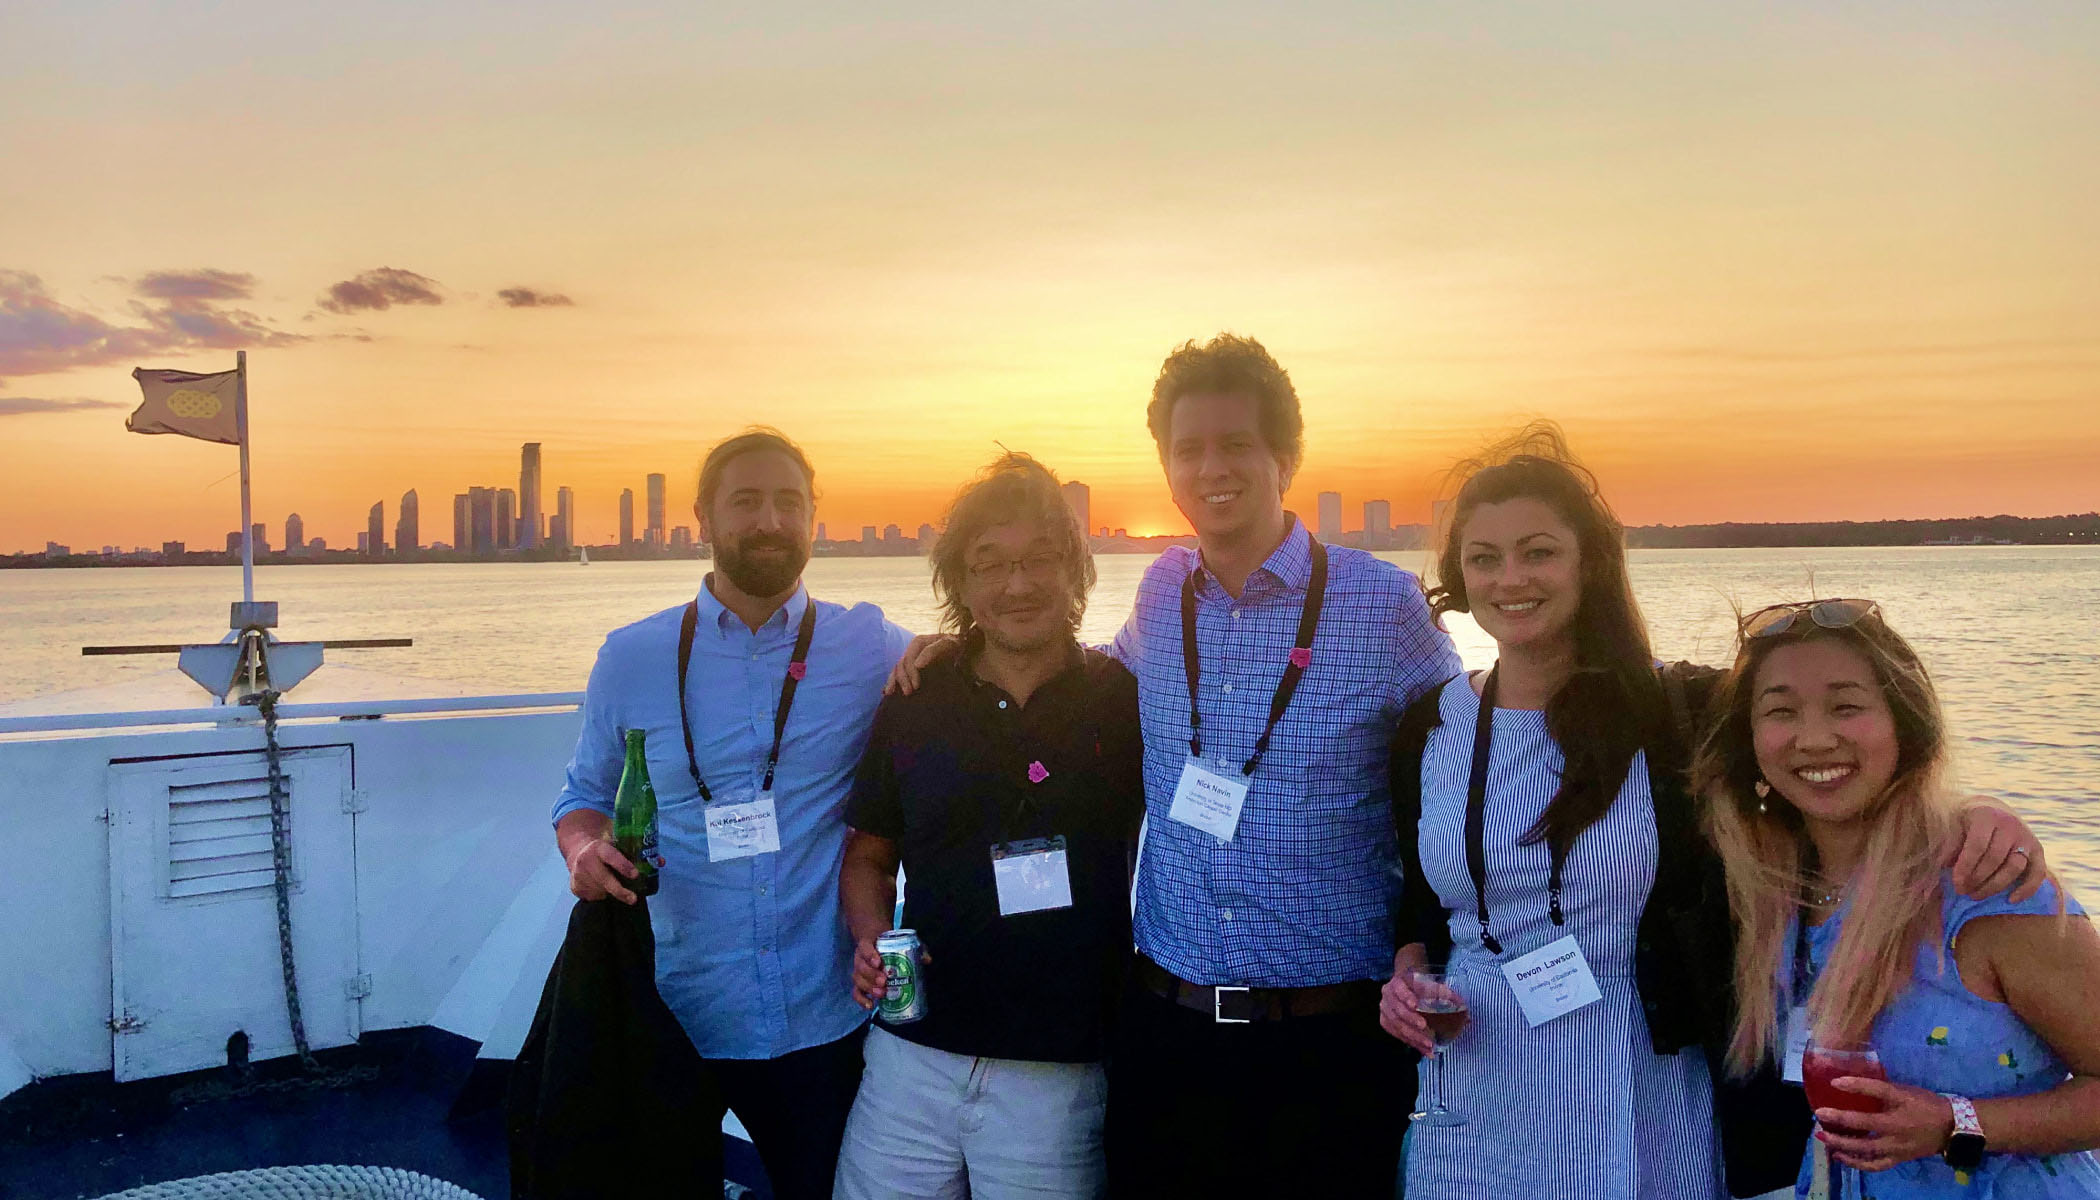 Five researchers smiling with arms around each other’s back while on a boat with the sunset and city skyline in the background.